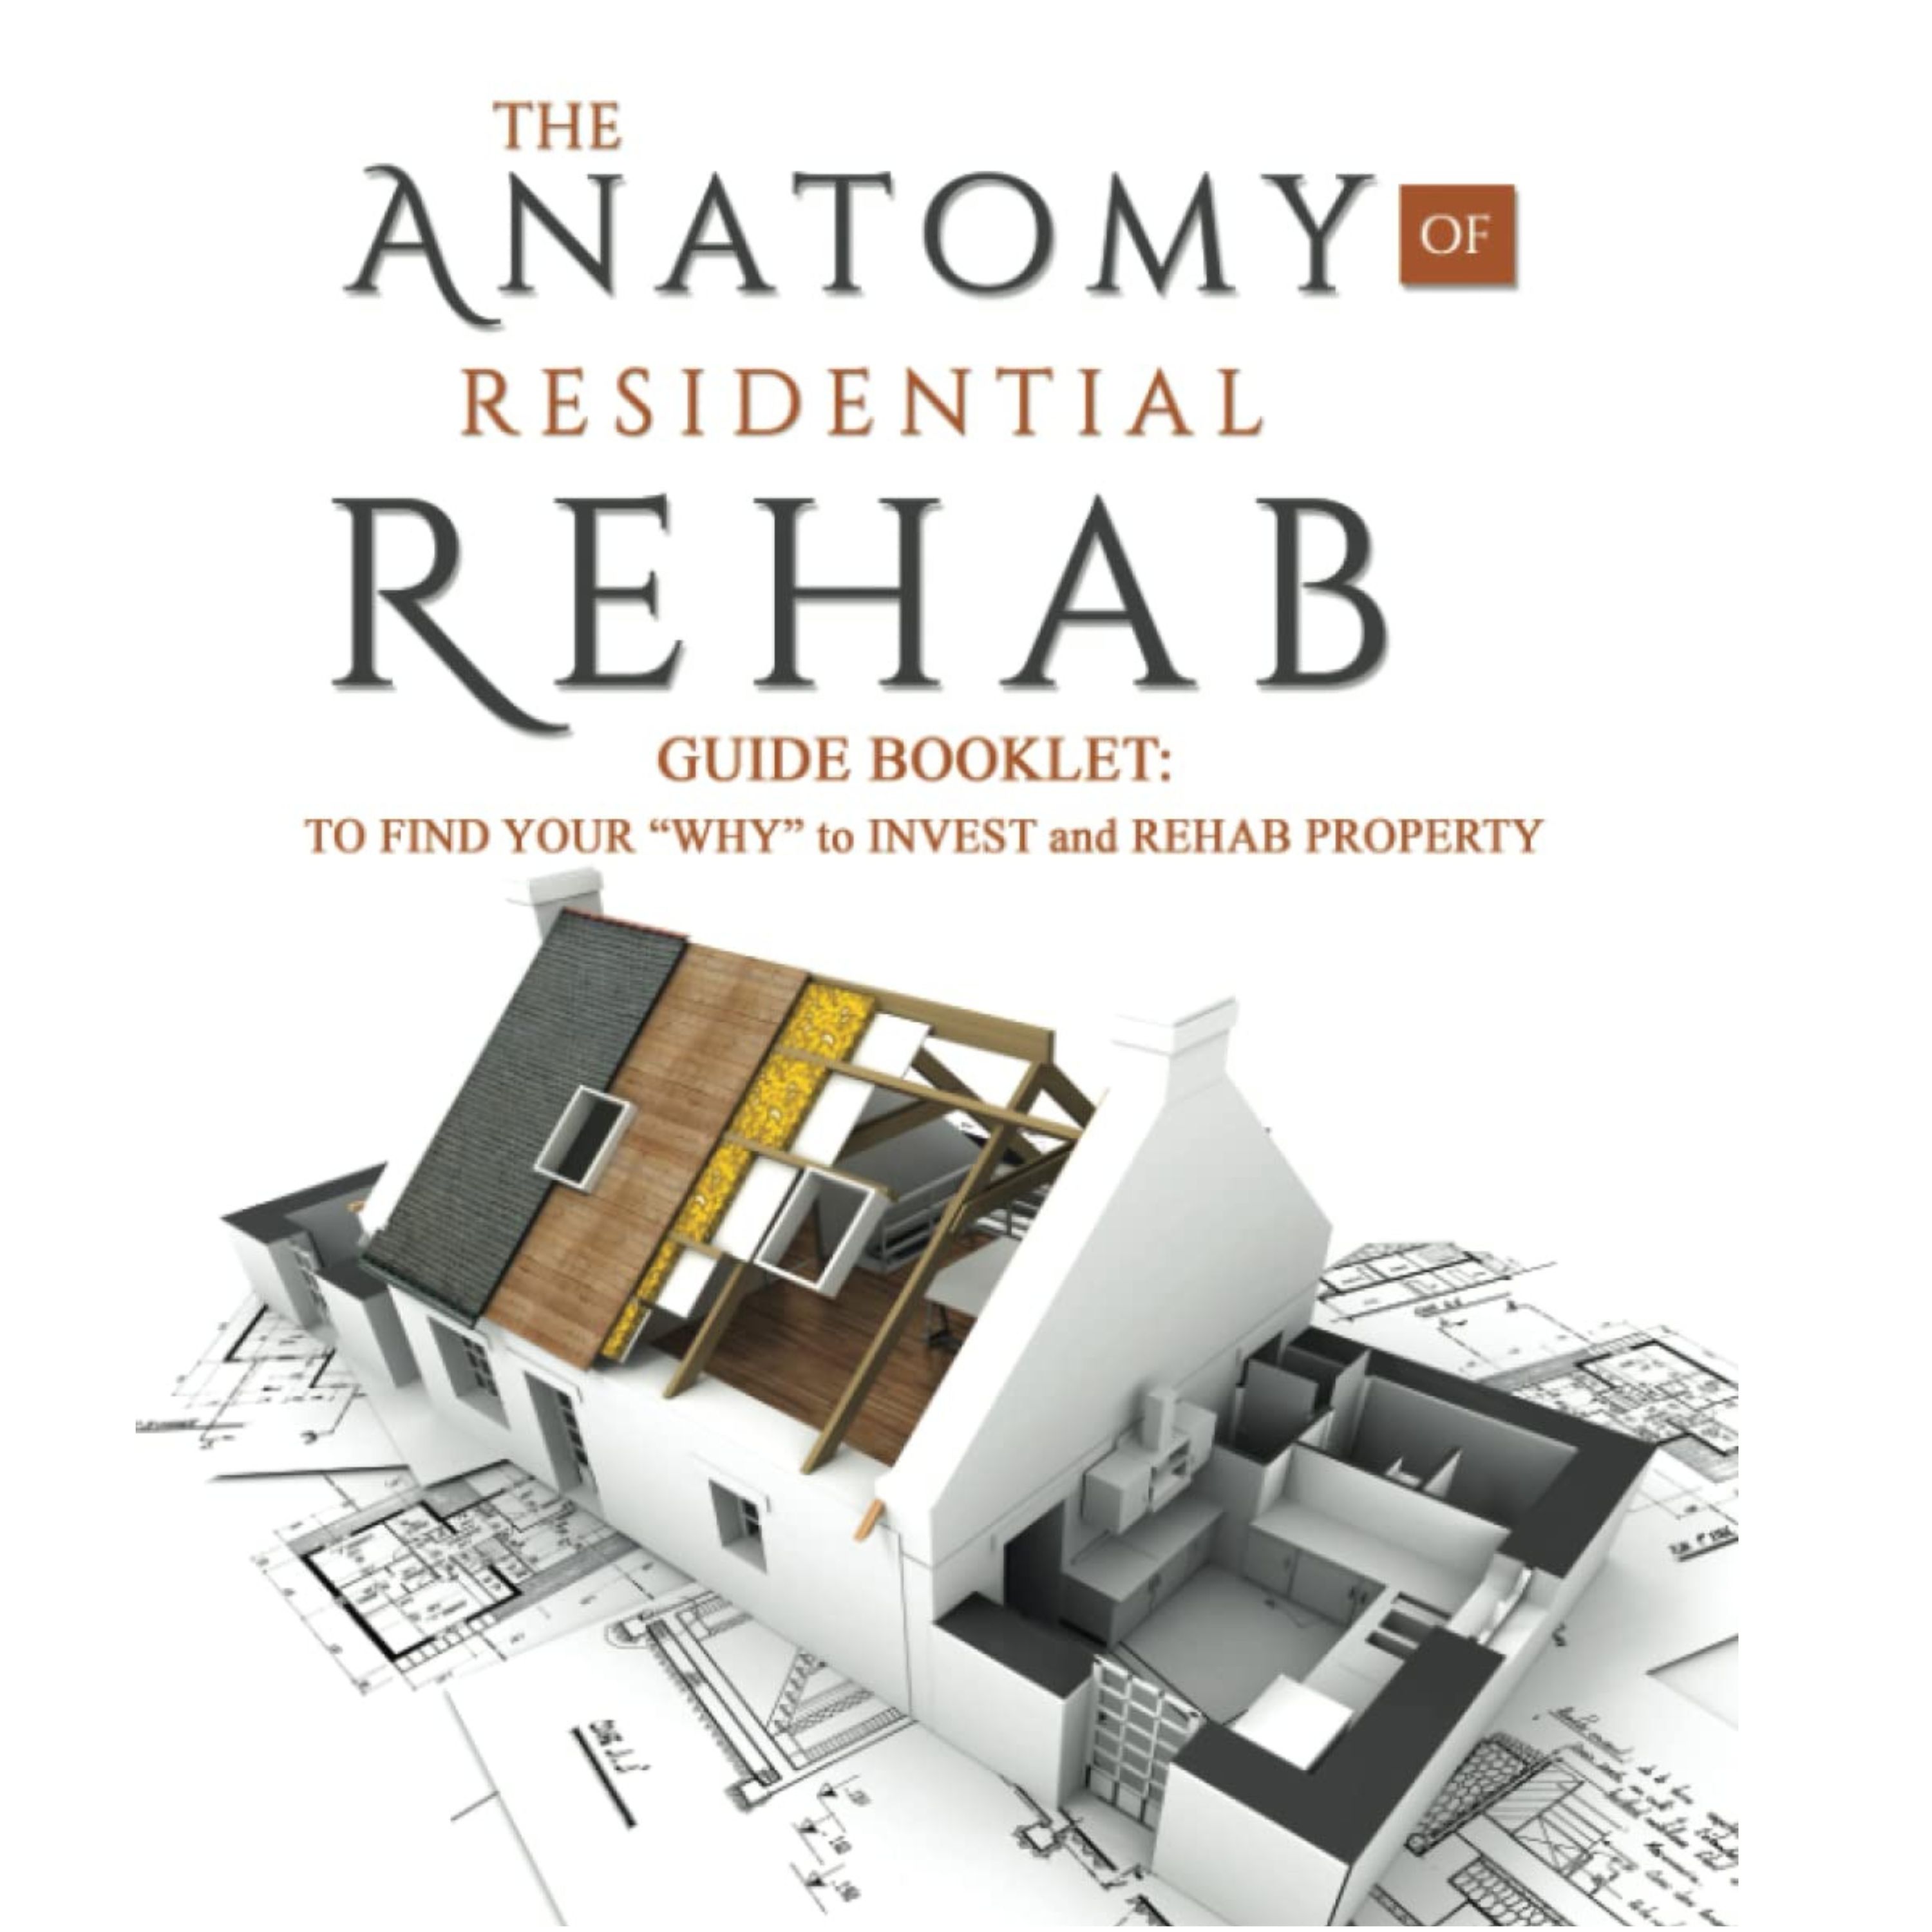 Artwork for The Anatomy of Residential Rehab